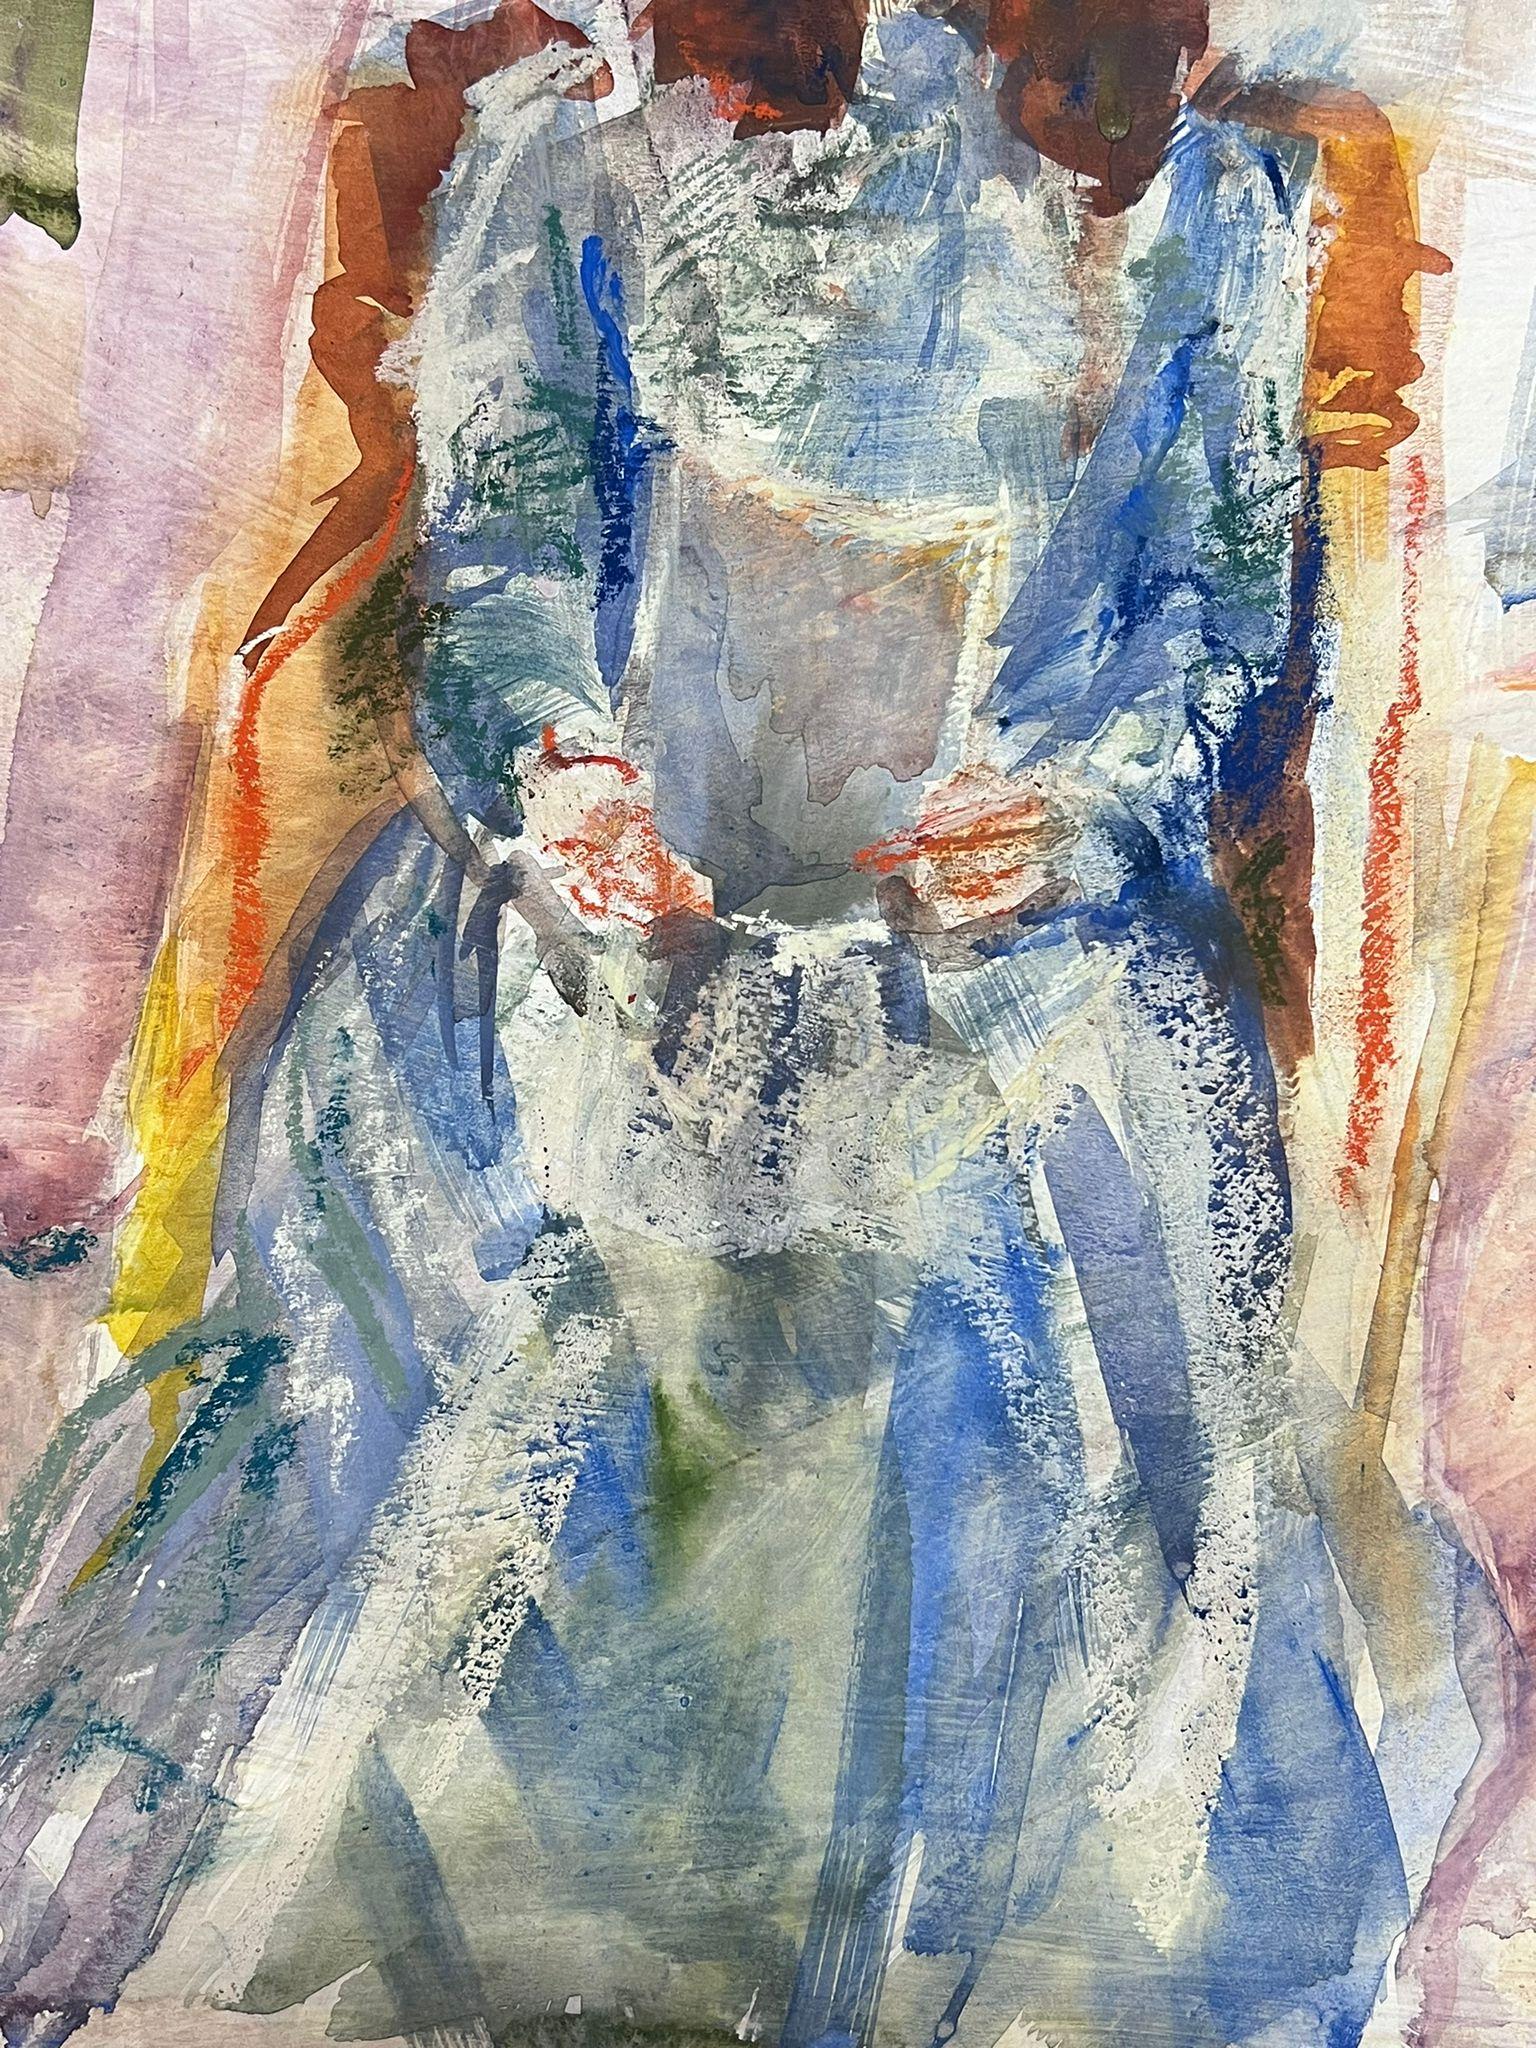 Lady Reading
by Helen Greenfield (British 20th century)
watercolour painting on thin board, unframed
painting : 14.75 x 16 inches
condition: overall very good
provenance: all the paintings we have by this artist have come from their studio sale in